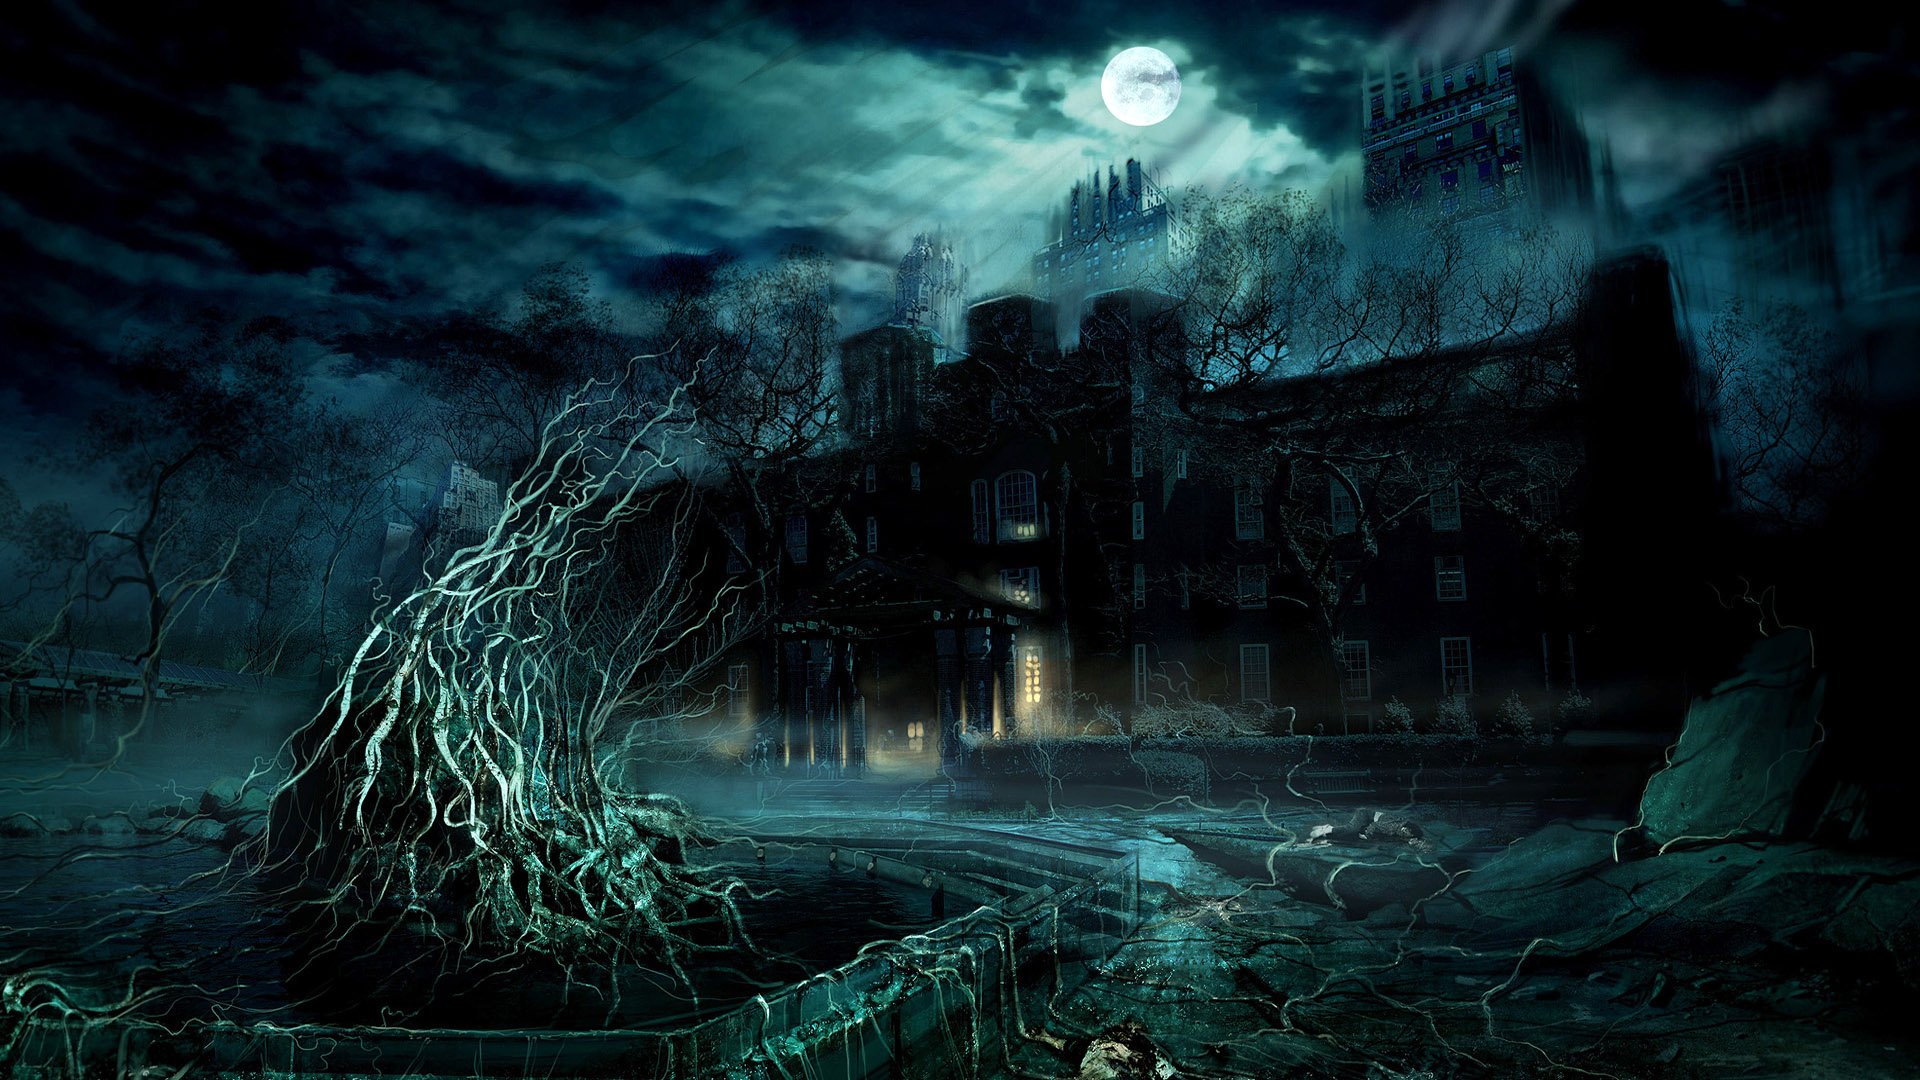 dark house 1080p wallpapers download hd wallpapers category hd 1920x1080